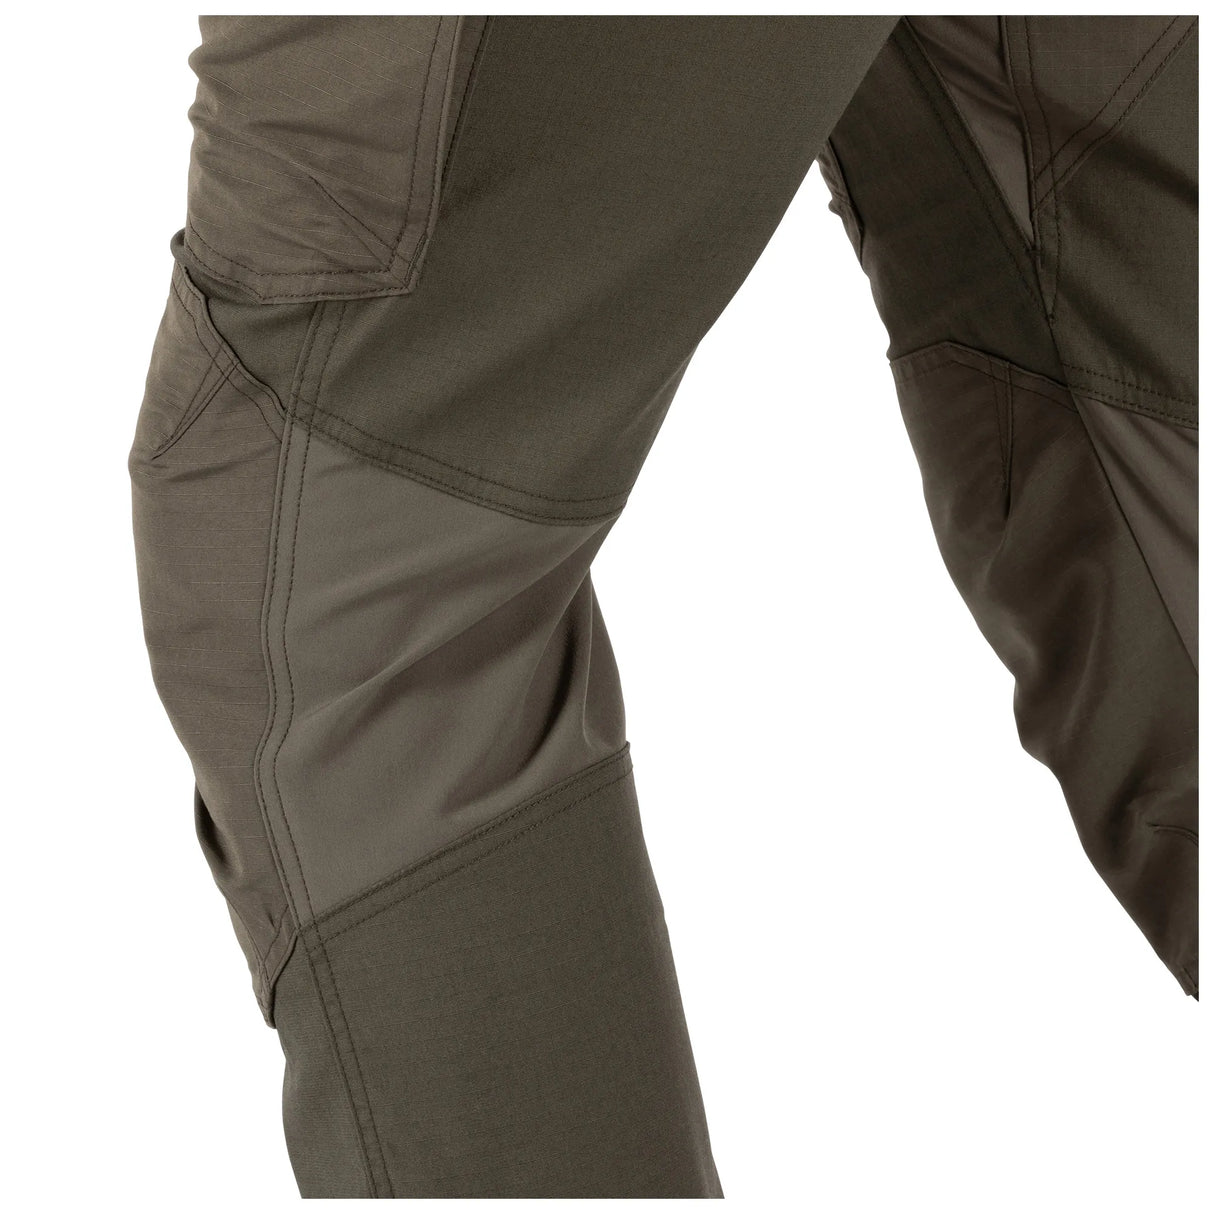 Confidence in Action: Experience the reliability and performance of the Quantum TDU Pant.